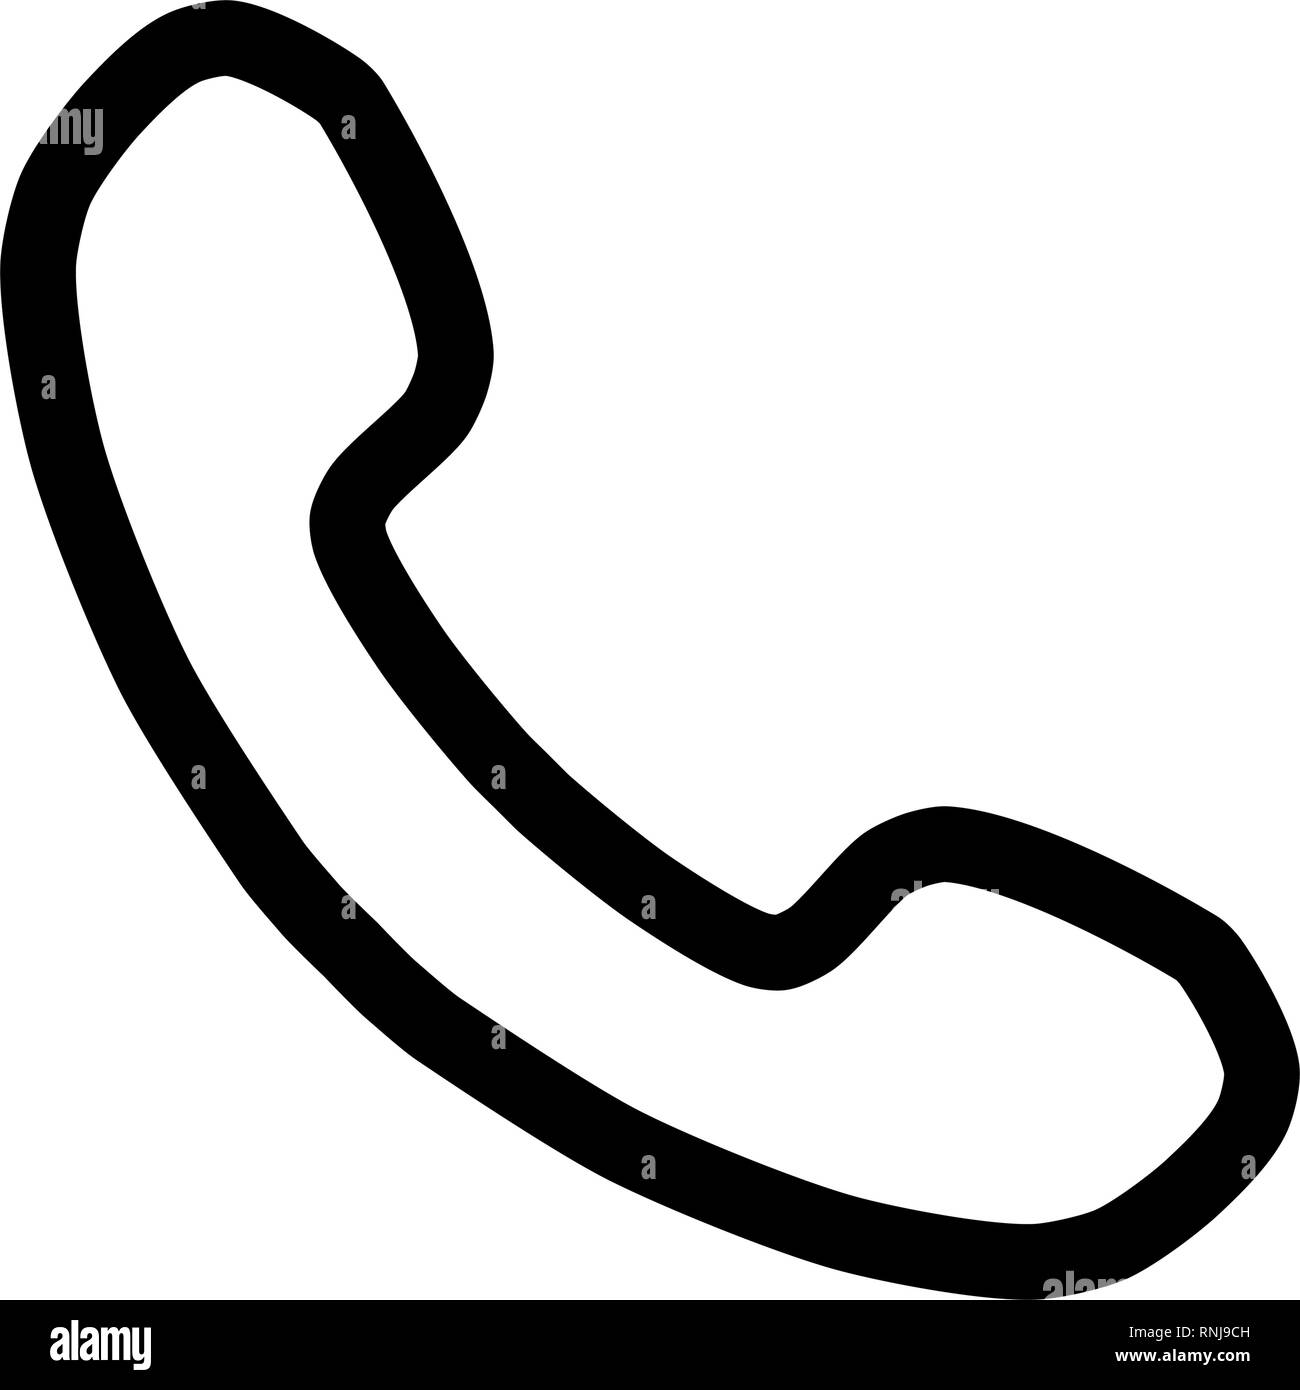 Phone symbol icon - black simple outline, isolated - vector illustration Stock Vector